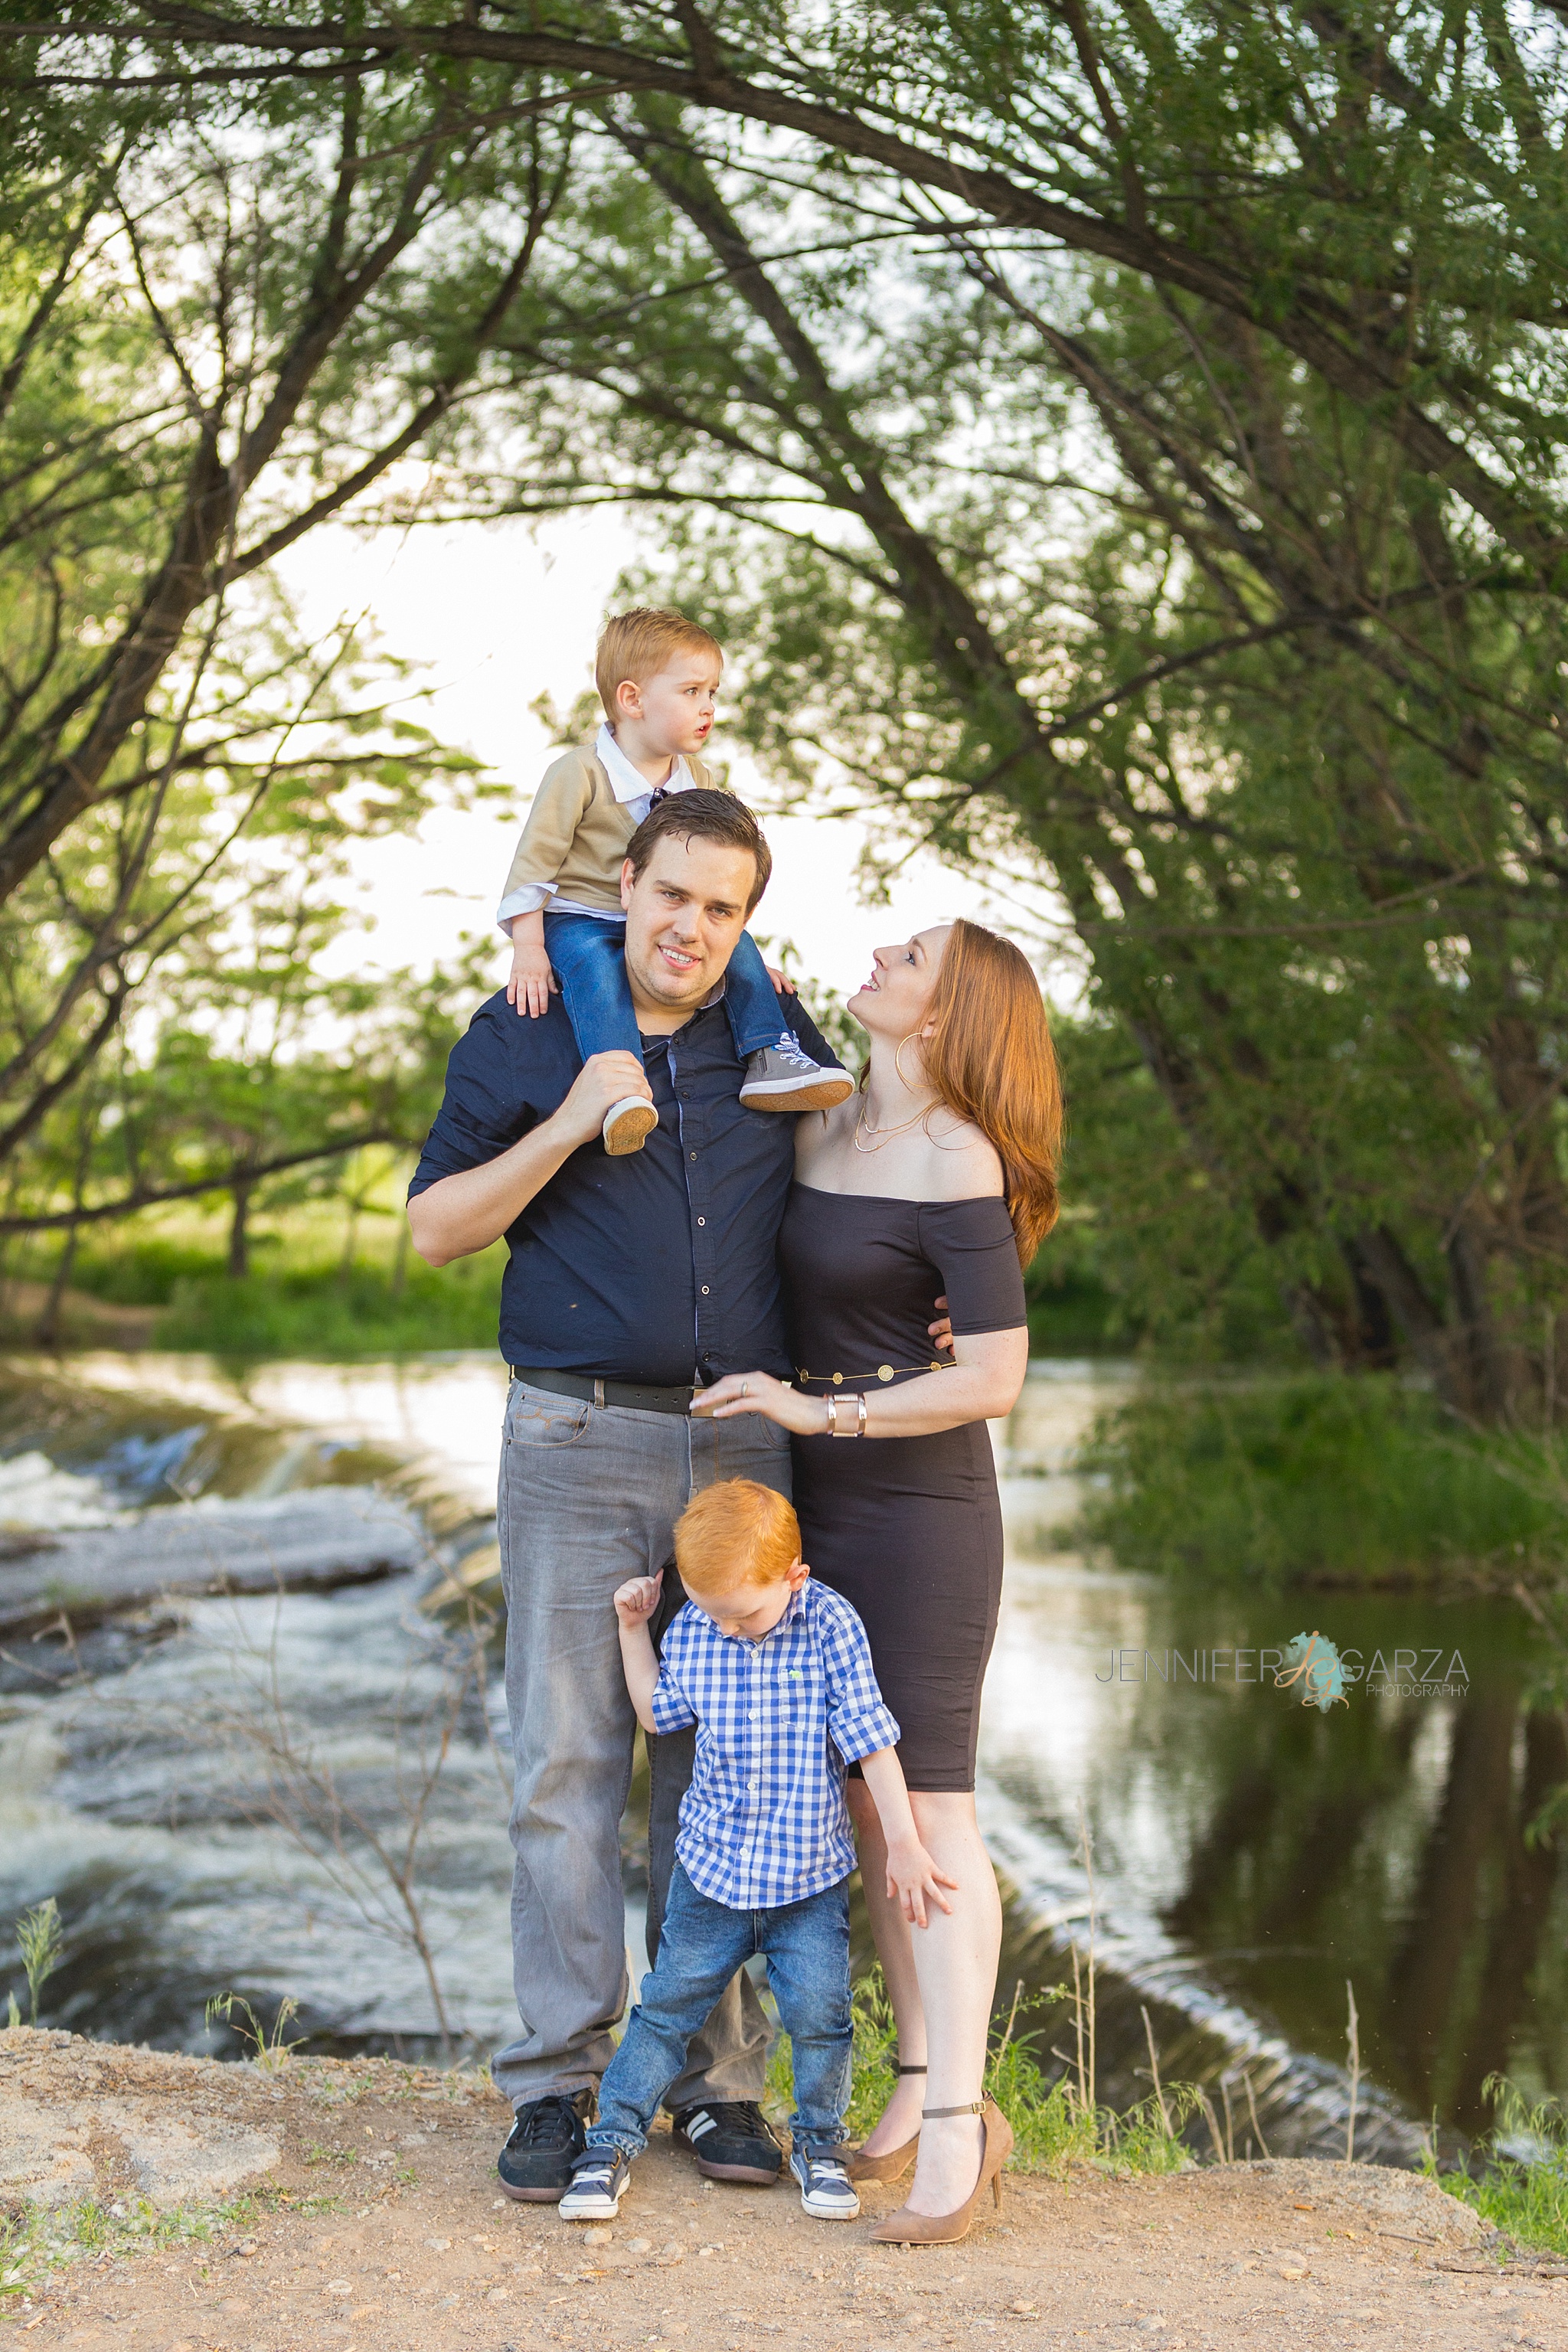 The Moffitt Family Photo Session at Golden Ponds Nature Area in Longmont, Colorado.